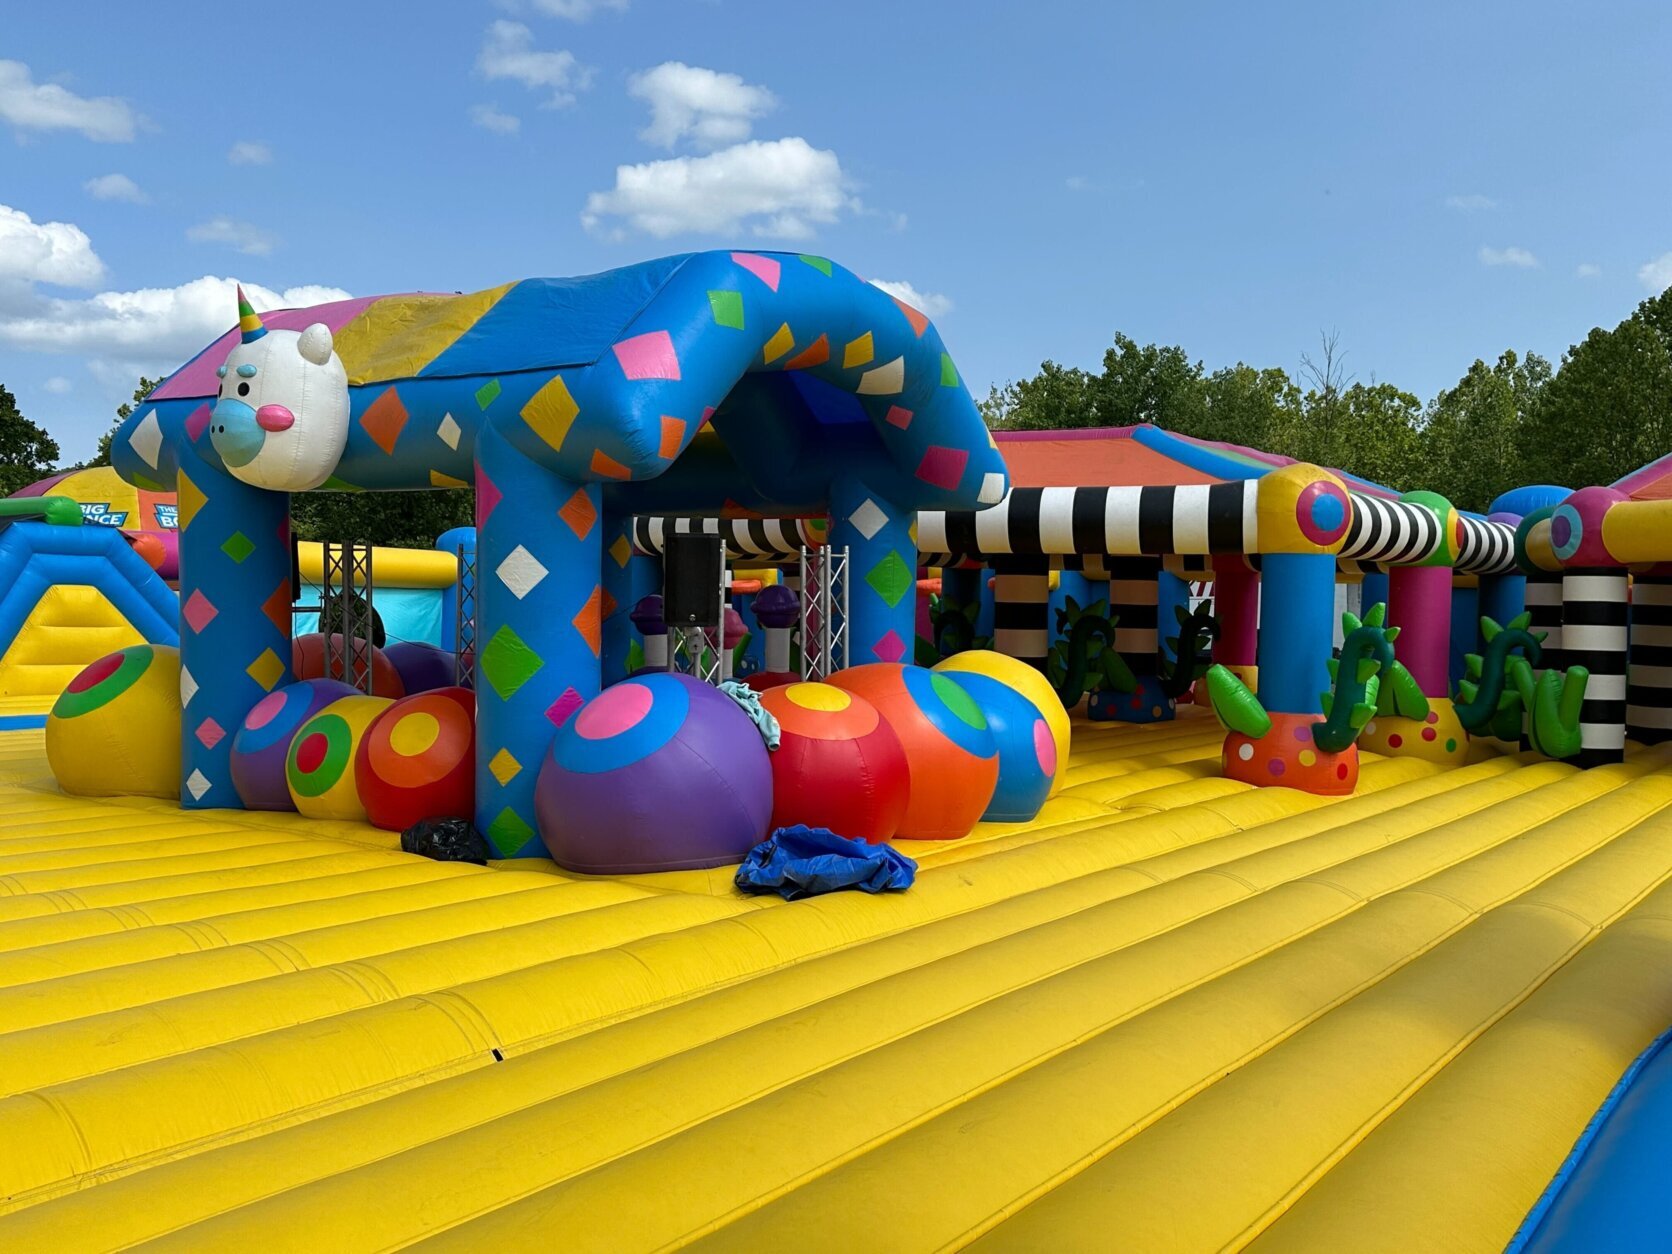 <p>WTOP got a look at the attraction&#8217;s &#8220;adults only&#8221; bounce sessions, which happen on Saturdays from 6:30 p.m. to 9:30 p.m.</p>
<p>It did not disappoint.</p>
<p>&#8220;Almost feels like I&#8217;ve entered Candyland,&#8221; Preston Duarte said. He attended with his girlfriend Ty Wyatt. &#8220;It&#8217;s giving Willy Wonka vibes.&#8221;</p>
<p>When Wyatt saw <a href="https://wtop.com/gallery/prince-georges-county/worlds-biggest-bounce-house-returns-to-dc-area-for-limited-time/" target="_blank" rel="noopener">photos of the bounce house for the first time,</a> she quickly realized how much she wanted to see it in person</p>
<p>&#8220;I was like, &#8216;Oh, my god, that&#8217;s the biggest bounce house I&#8217;ve ever seen,'&#8221; Wyatt said.</p>
<p>&#8220;I came out for my birthday to celebrate and be a big kid,&#8221; Ijeoma Ugah, Baucum&#8217;s friend, said. &#8220;We were looking for something to do that wasn&#8217;t the club and restaurants. The big slide. You gotta do the big slide!&#8221;</p>
